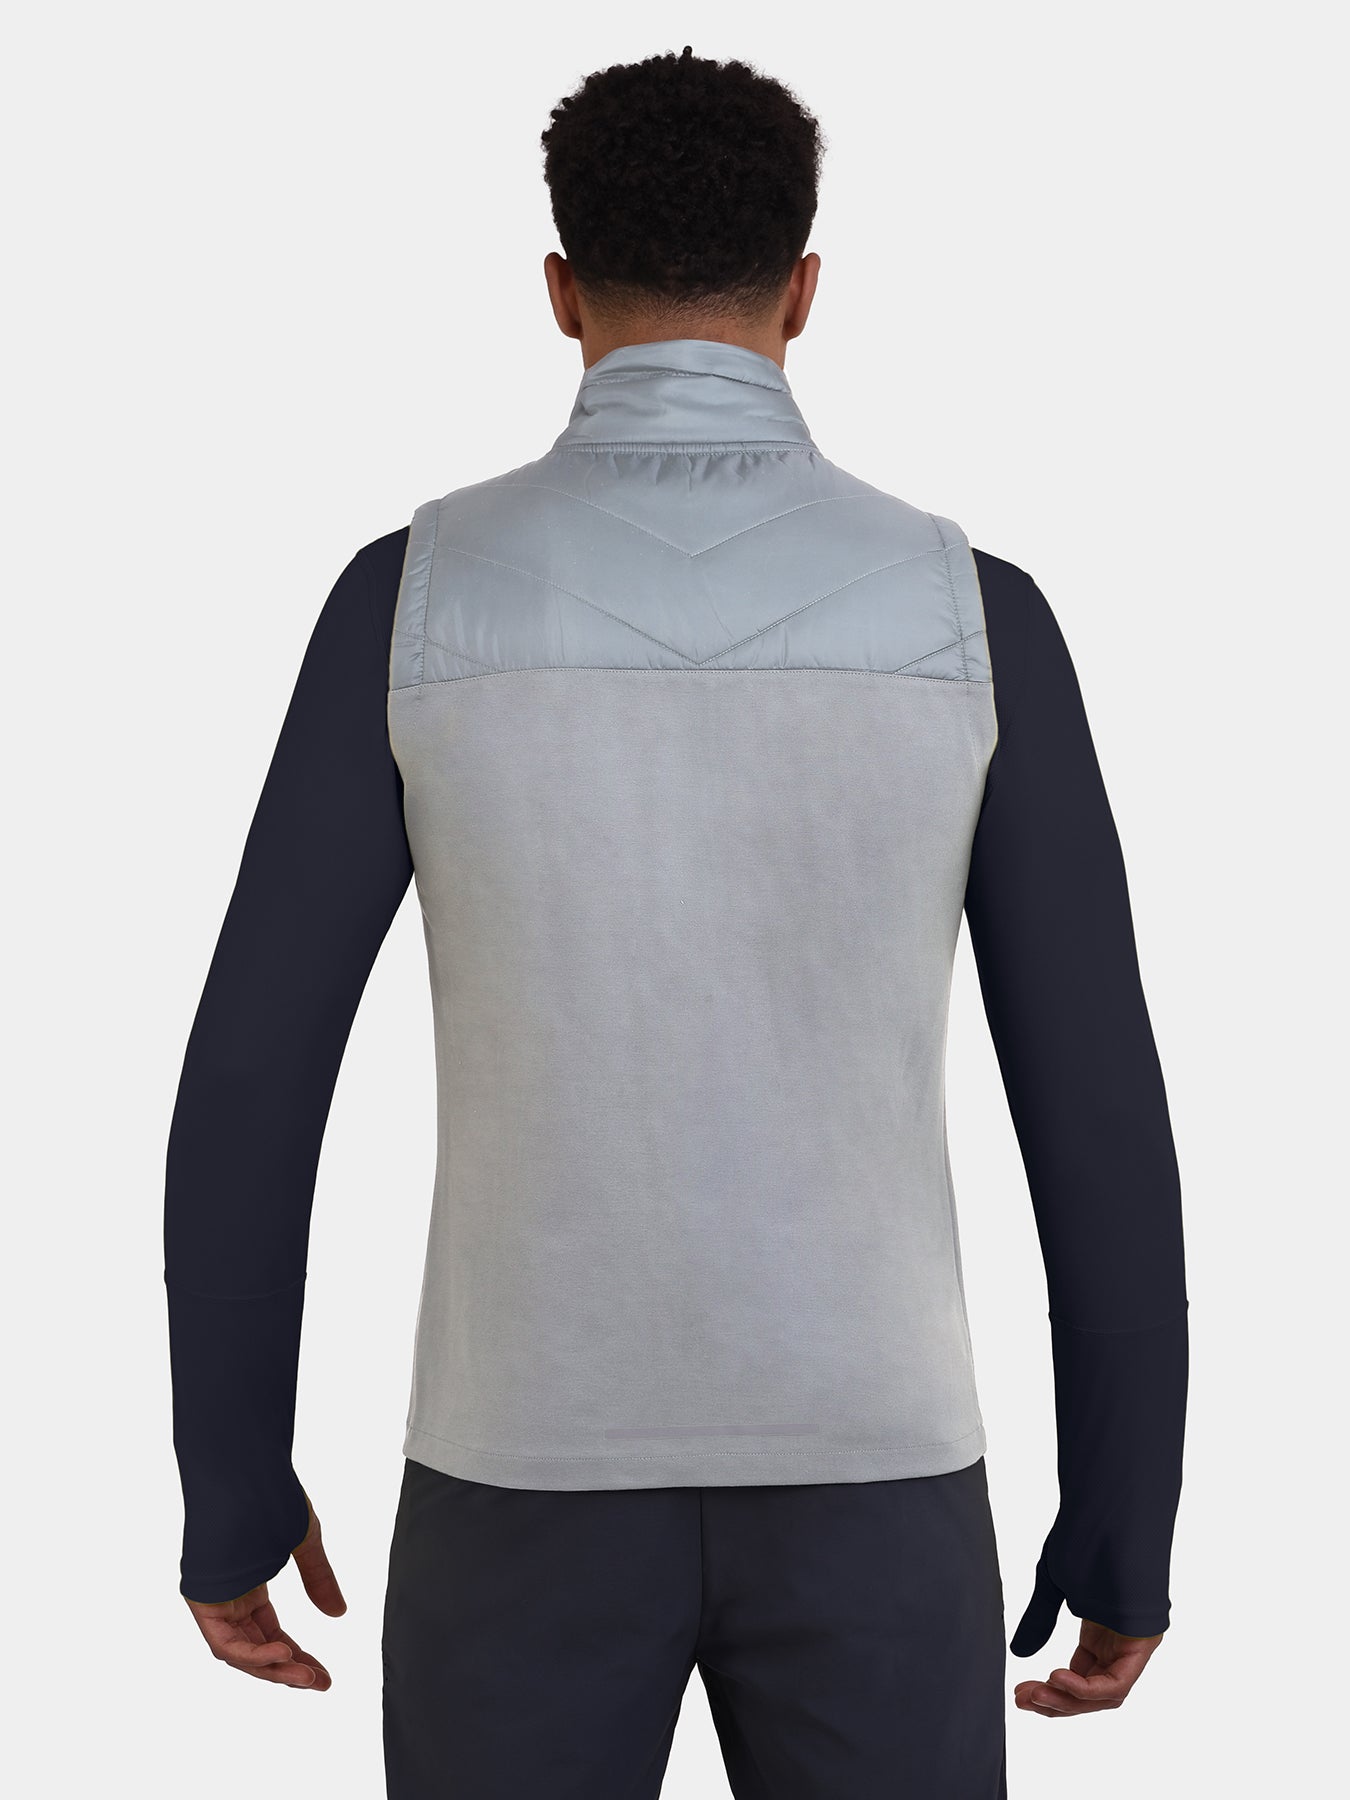 Excel Padded Running Gilet For Men With Zip Pockets & Reflective Strips